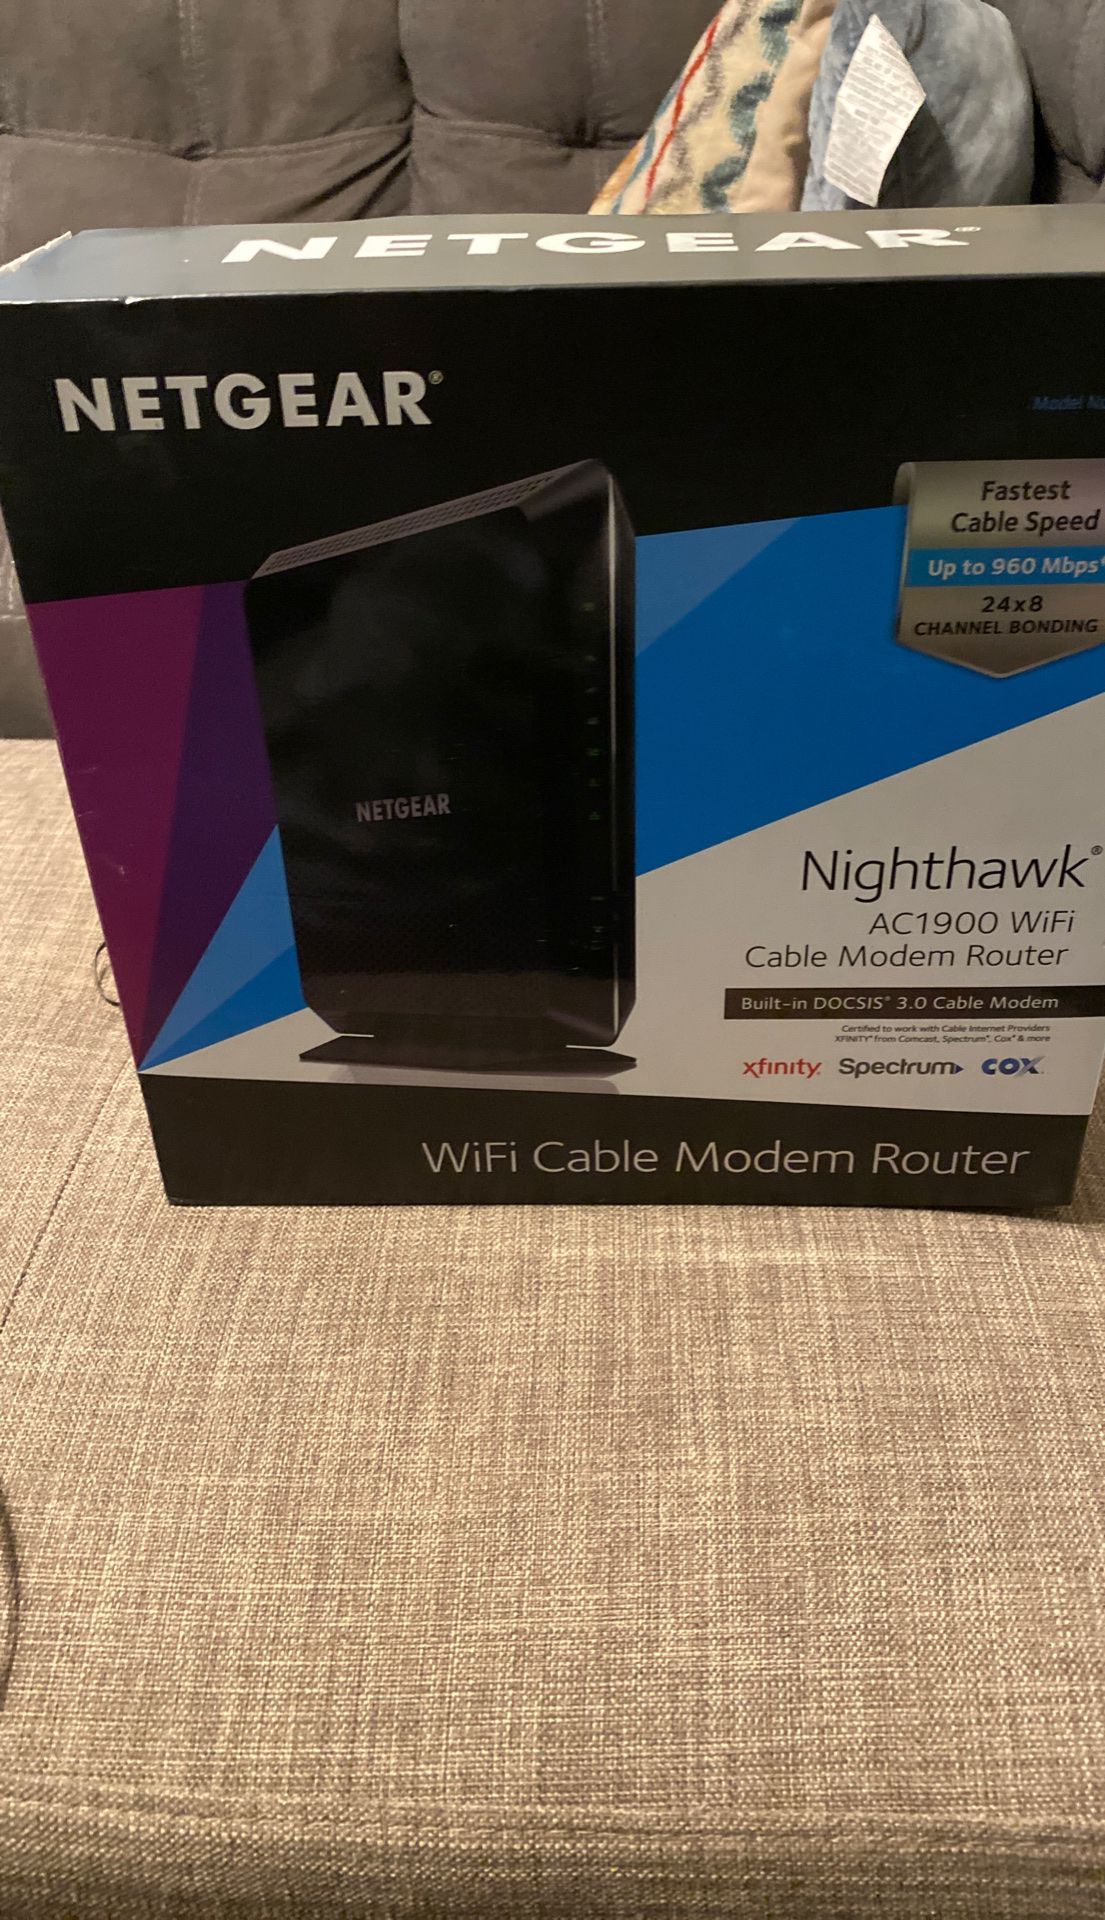 Nighthawk AC1900 WiFi cable modem router